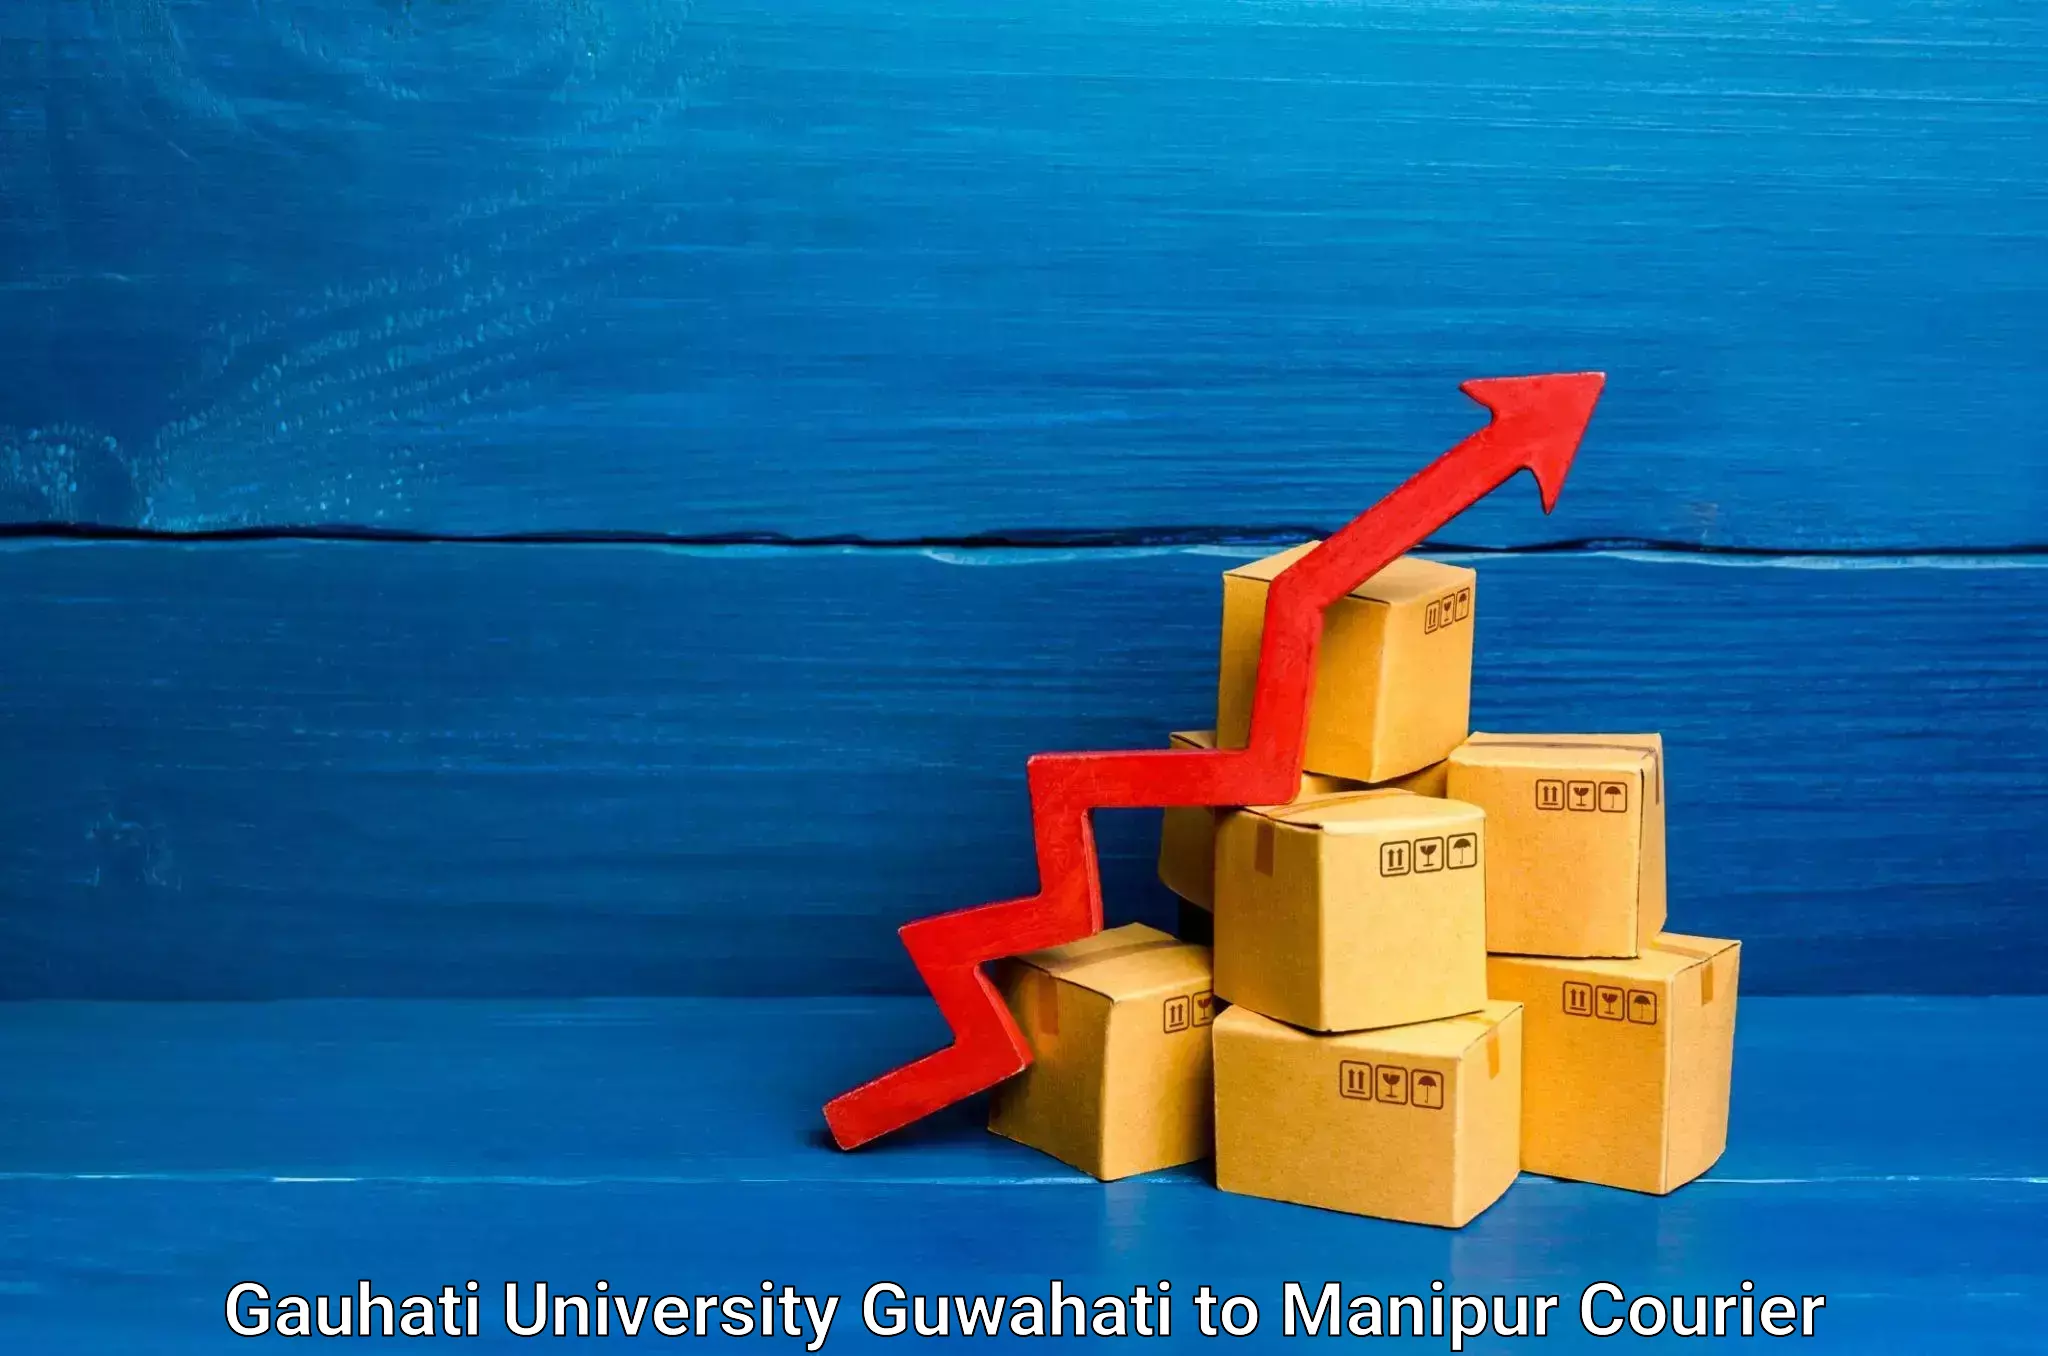 Easy access courier services Gauhati University Guwahati to Chandel